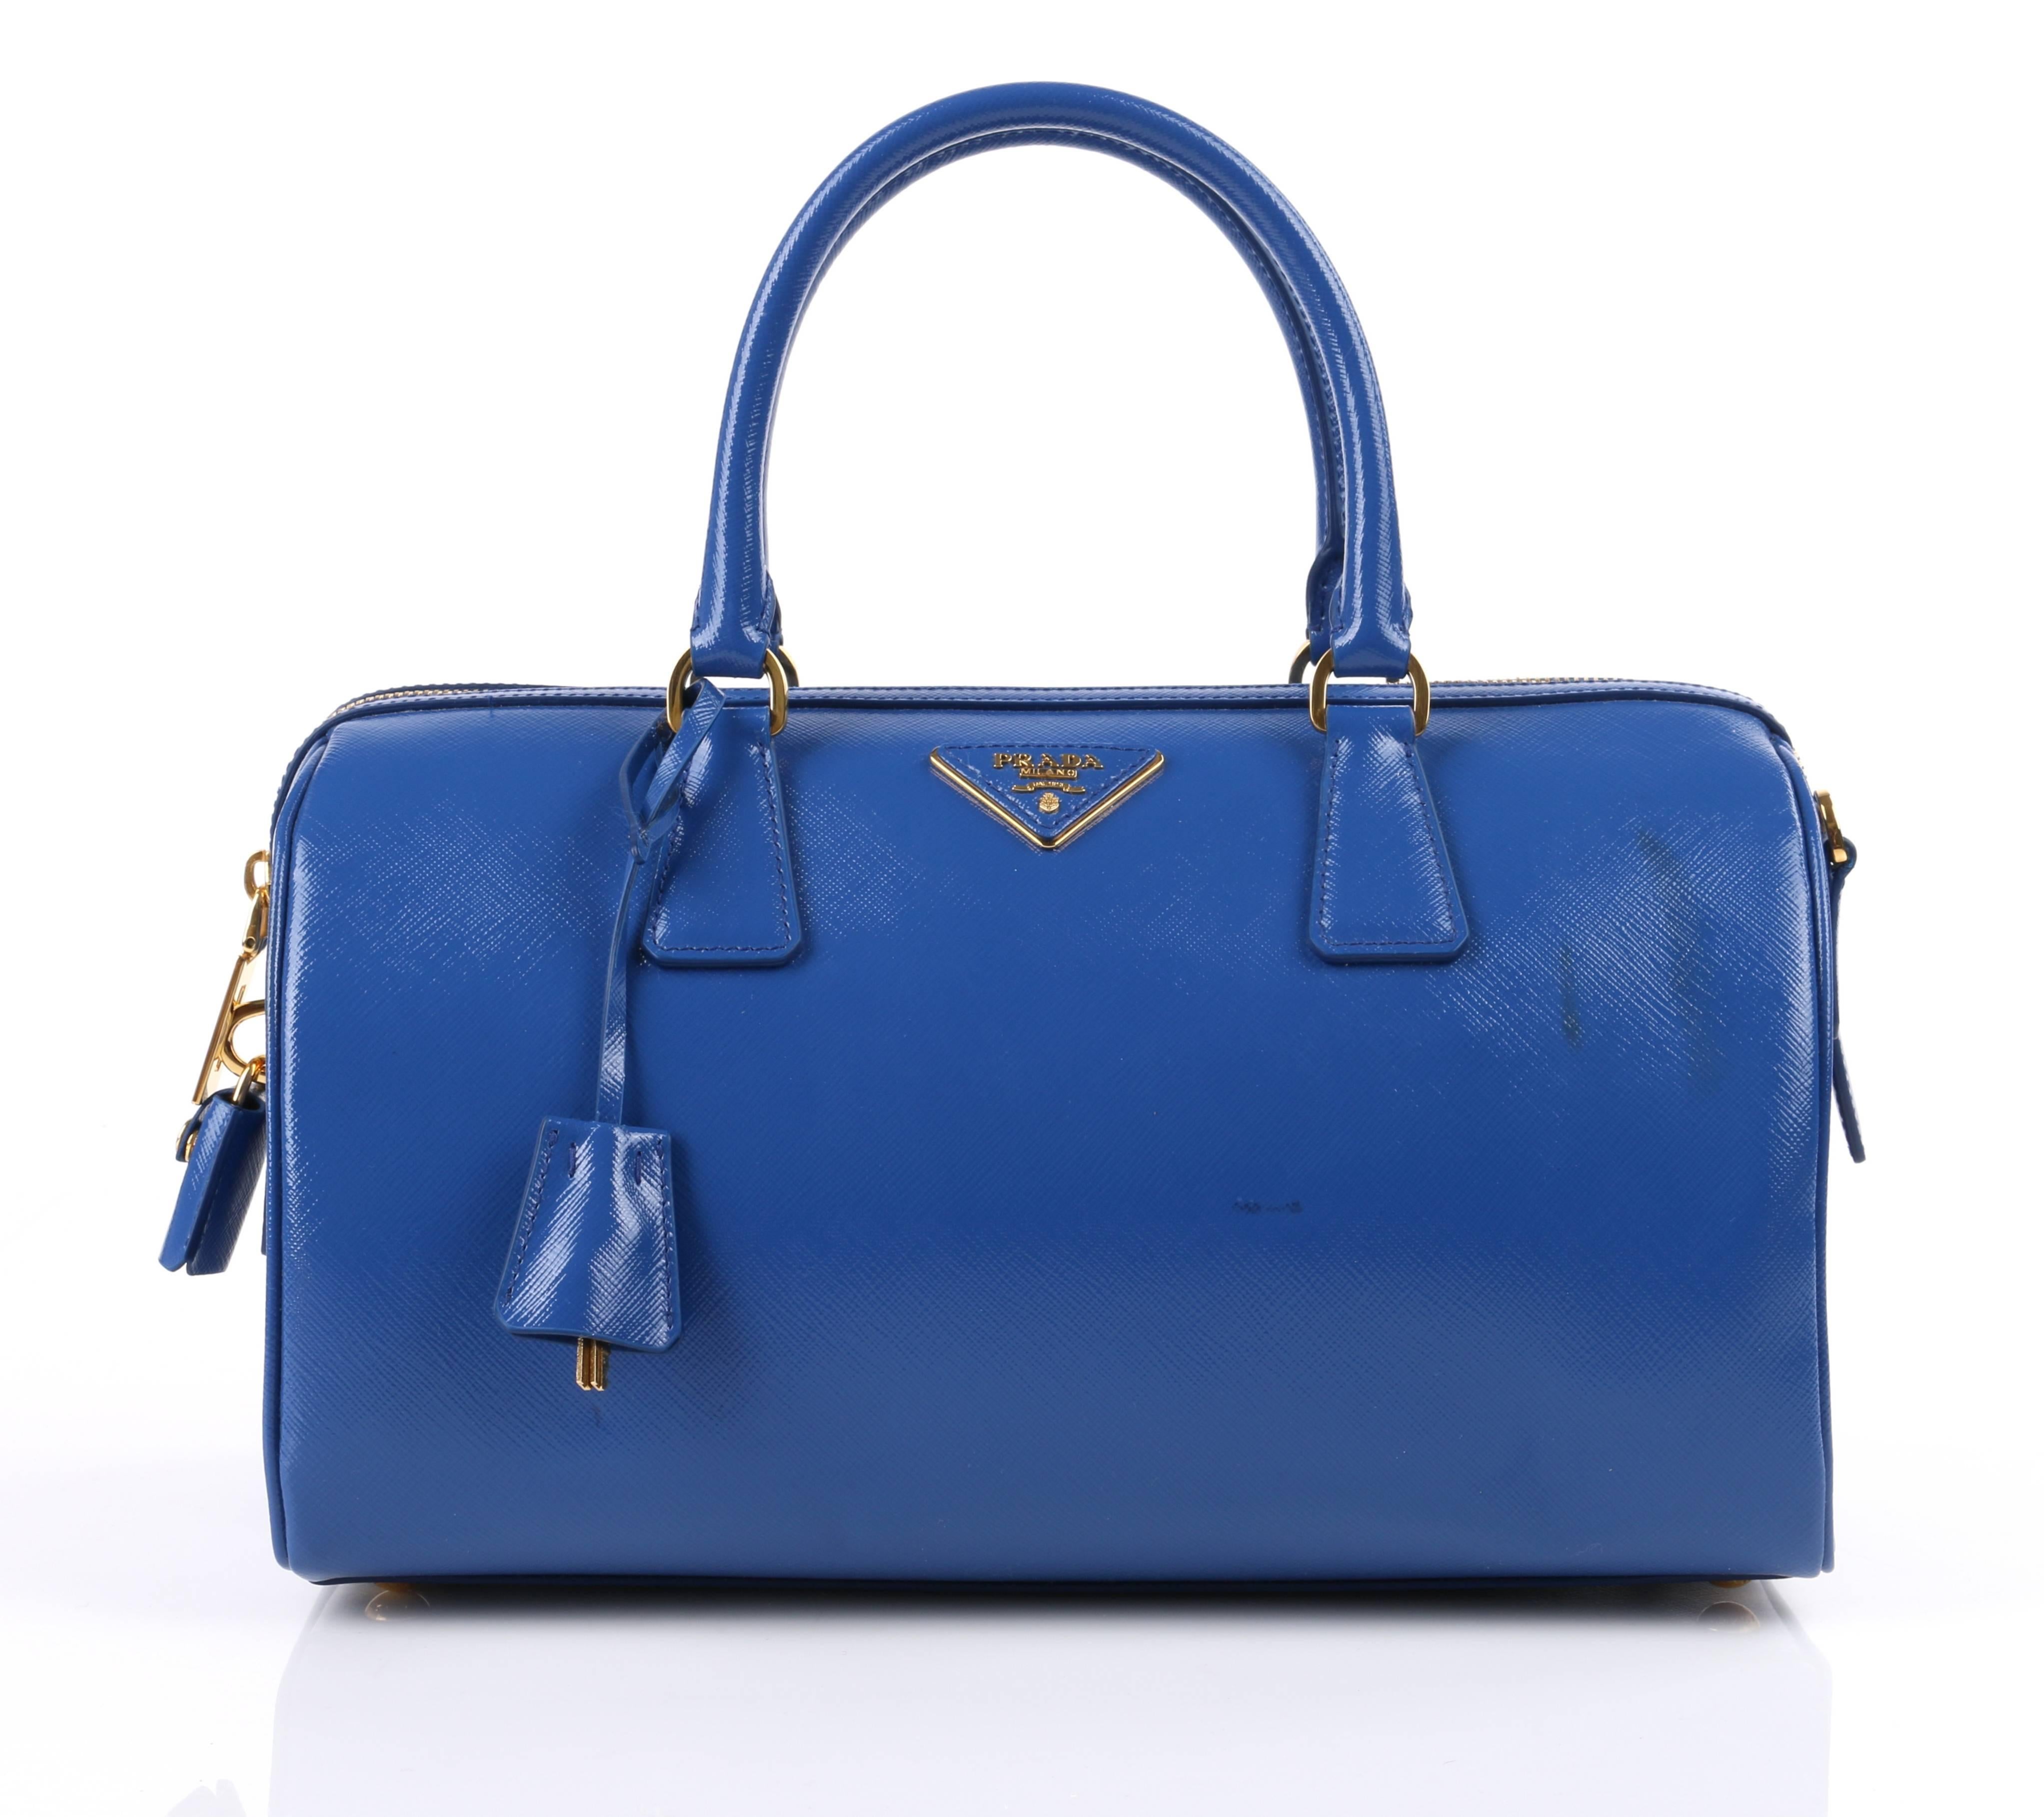 Prada Spring/Summer 2012 blue saffiano vernice (patent) leather convertible Boston bag. Designed by Miuccia Prada. Blue (azzurro) saffiano vernice leather structured body. Two single rolled top handles with gold-toned metal d-ring hardware. Piped